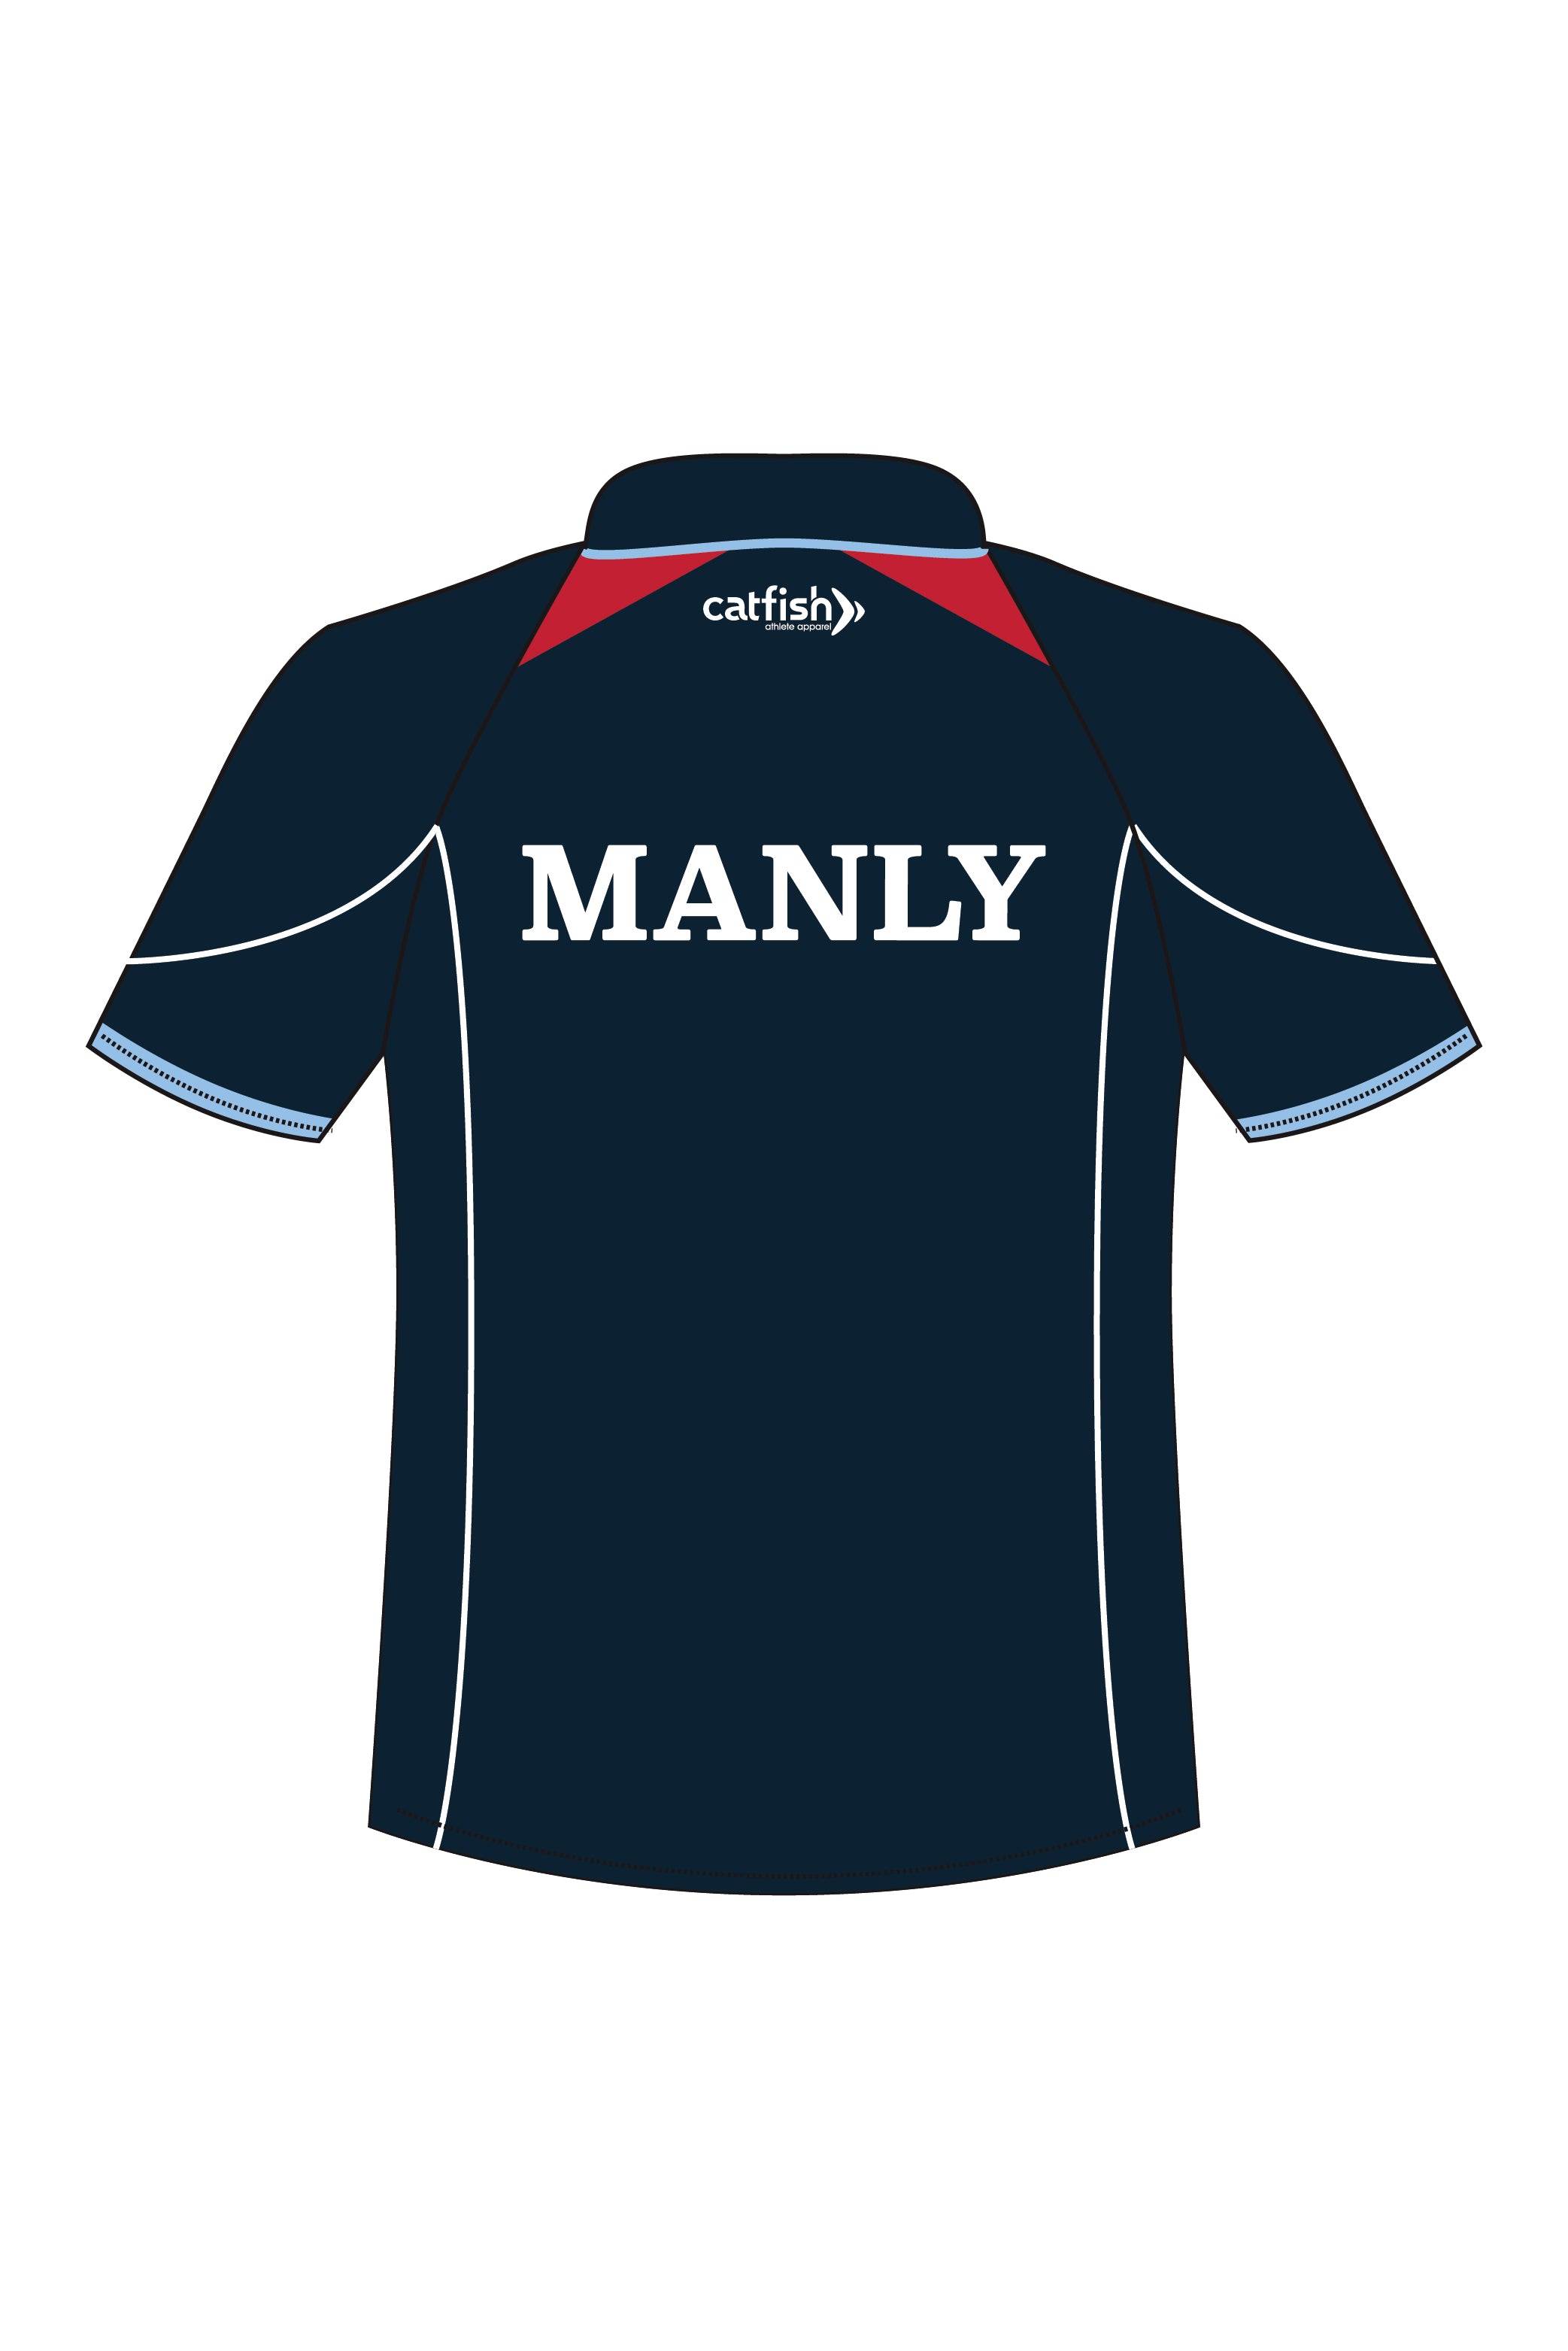 Manly Swimming Club Men's Polo